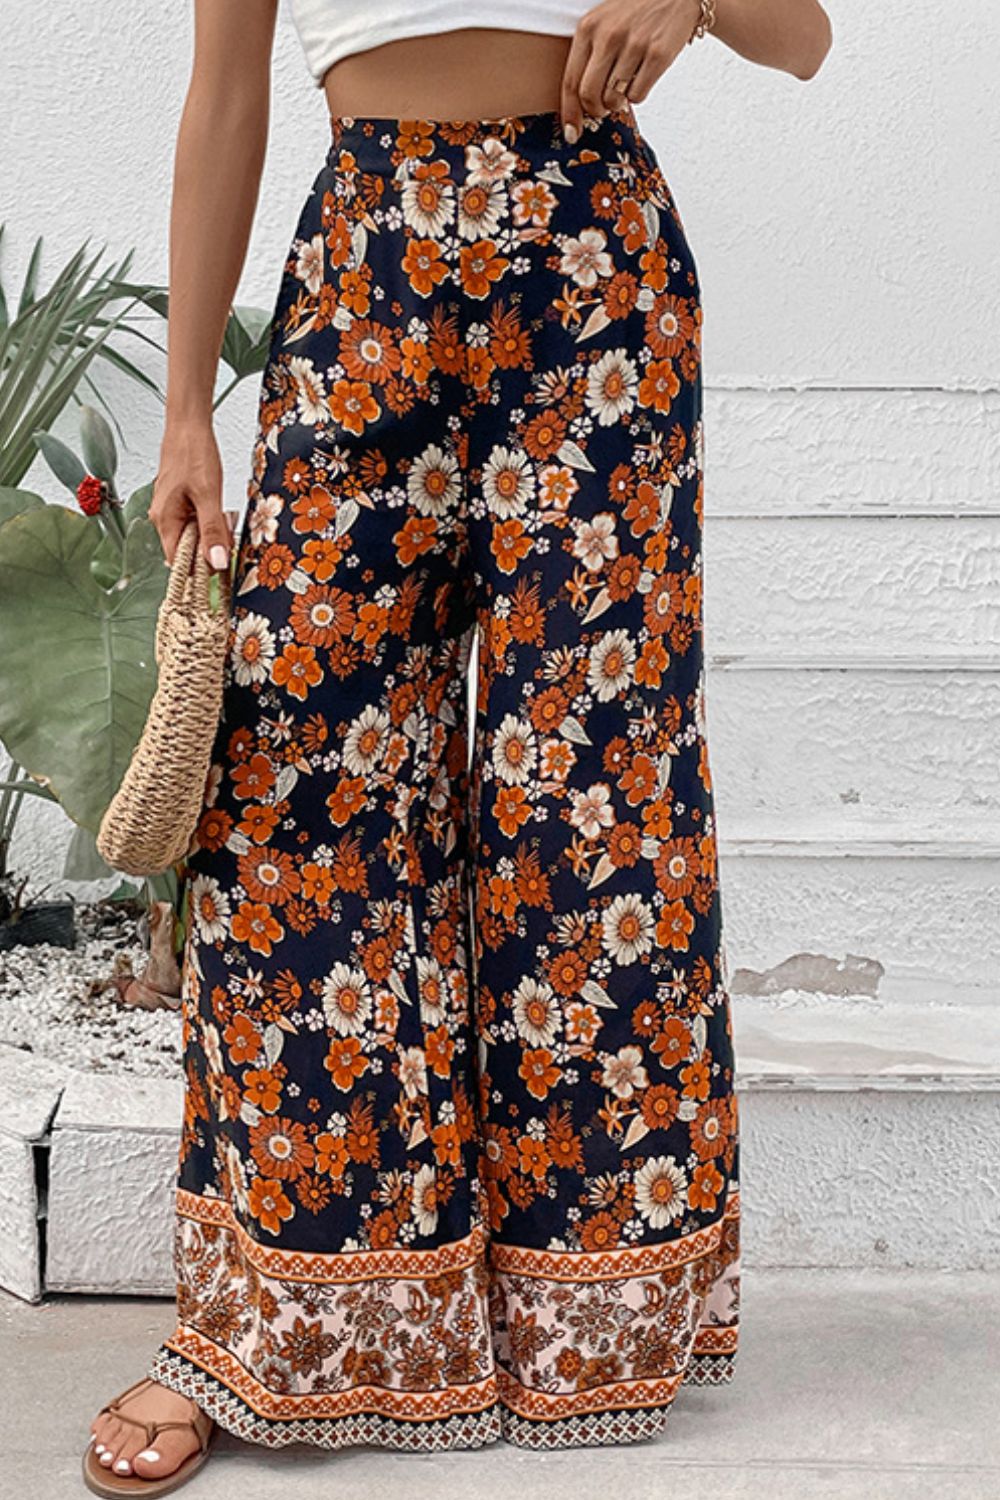 Blooming Petals Floral Wide Leg Pants with Pockets